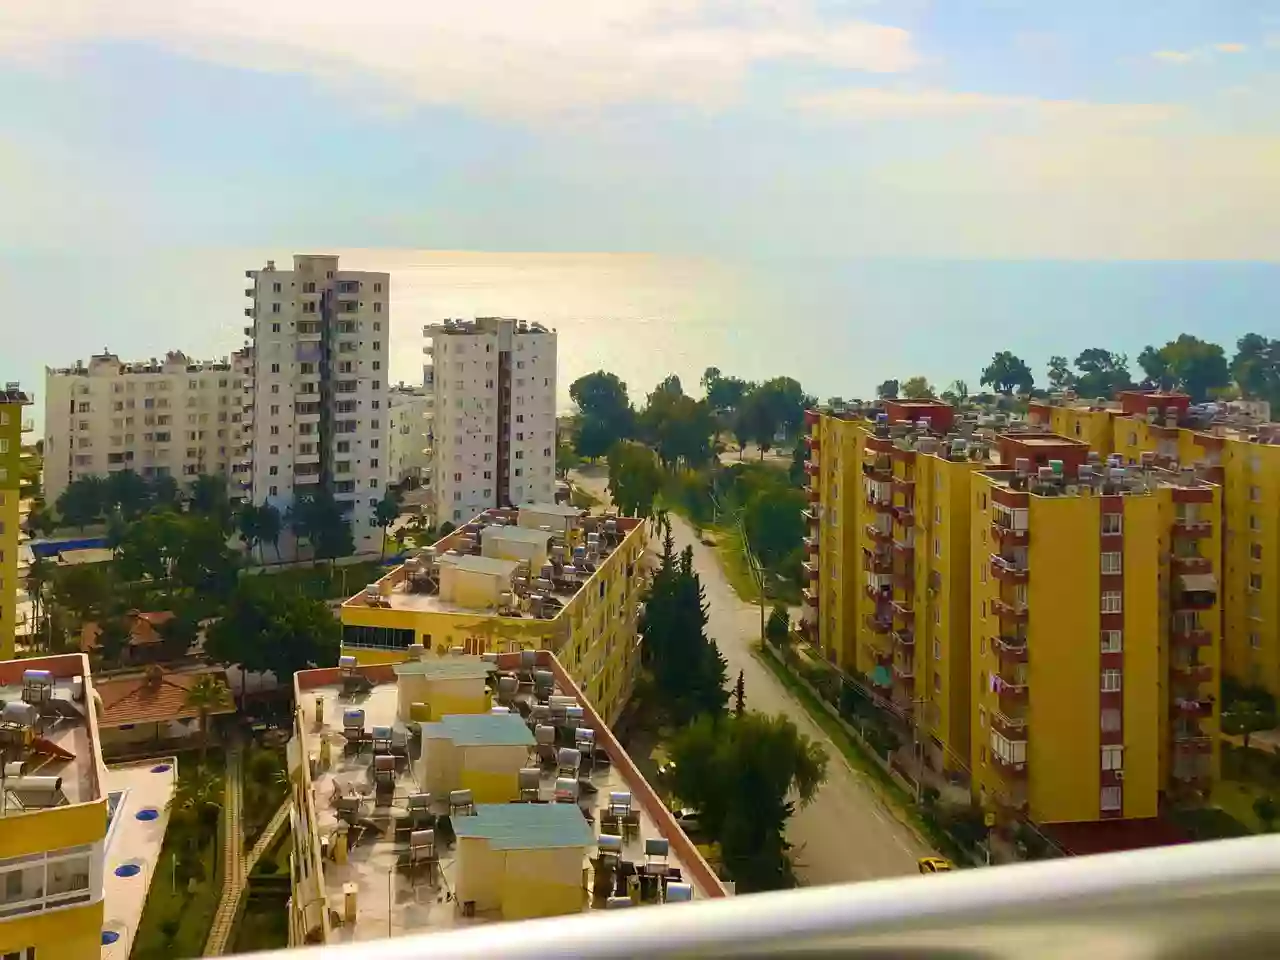 Mersin is the city of dreams.